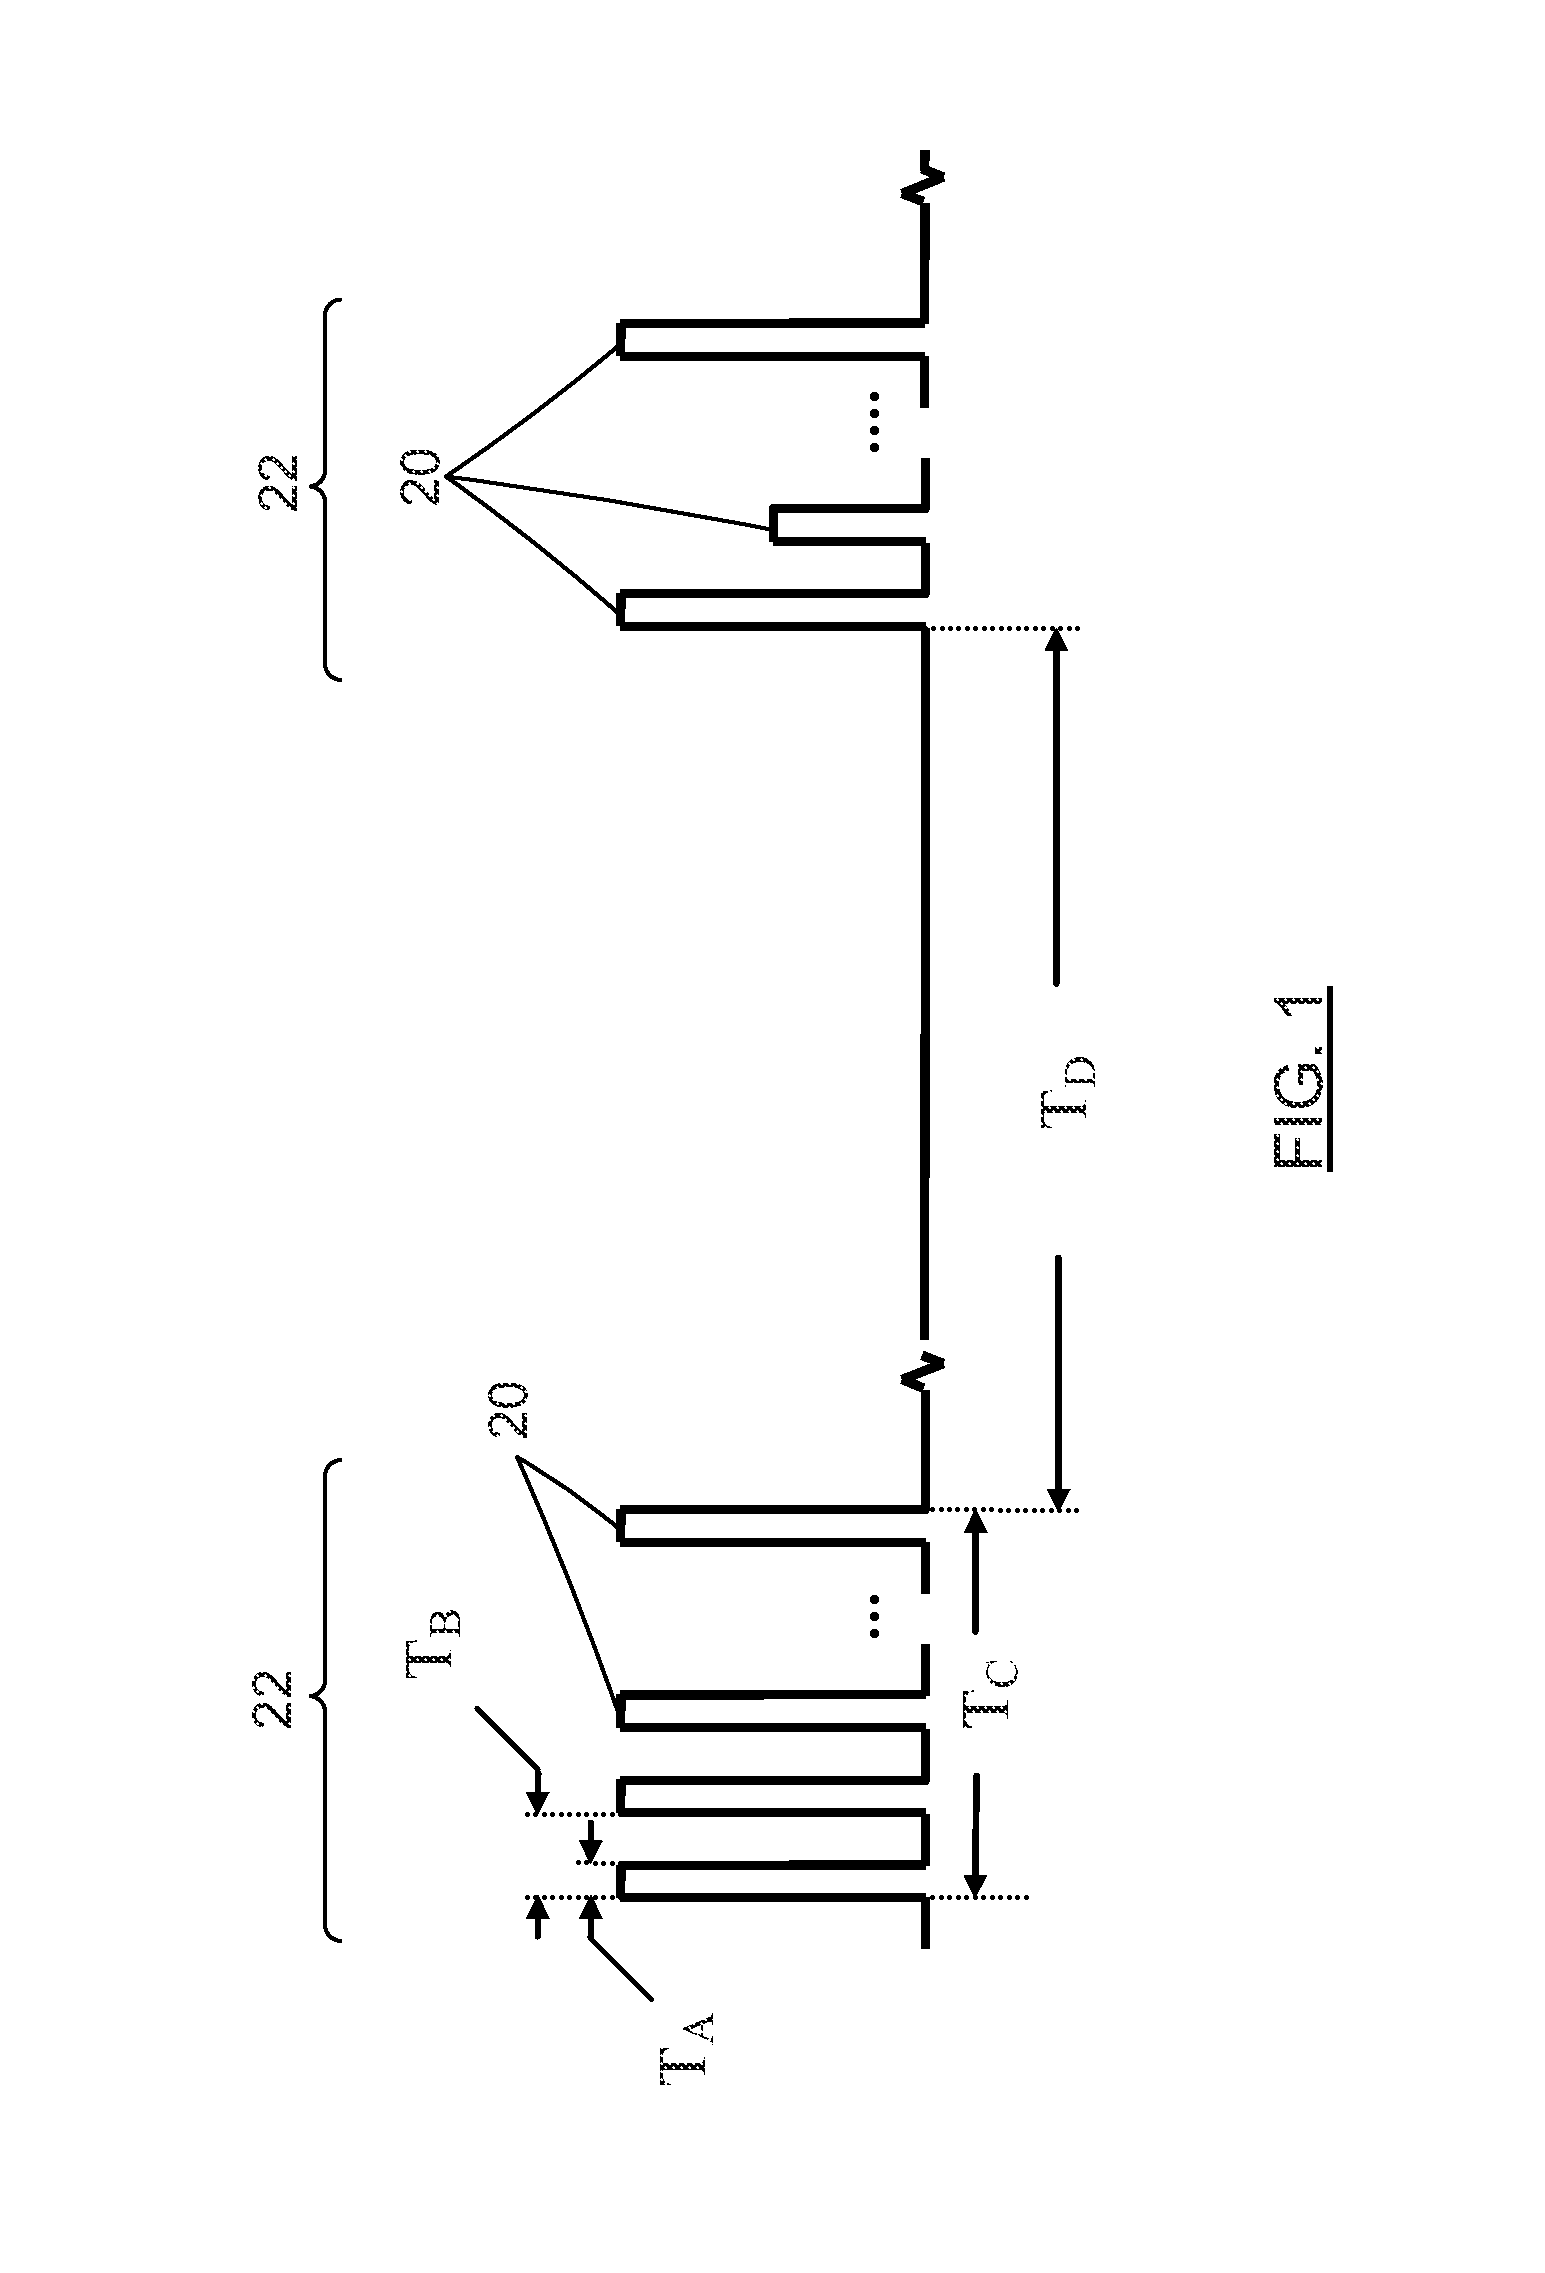 Circuit assembly for controlling an optical system to generate optical pulses and pulse bursts